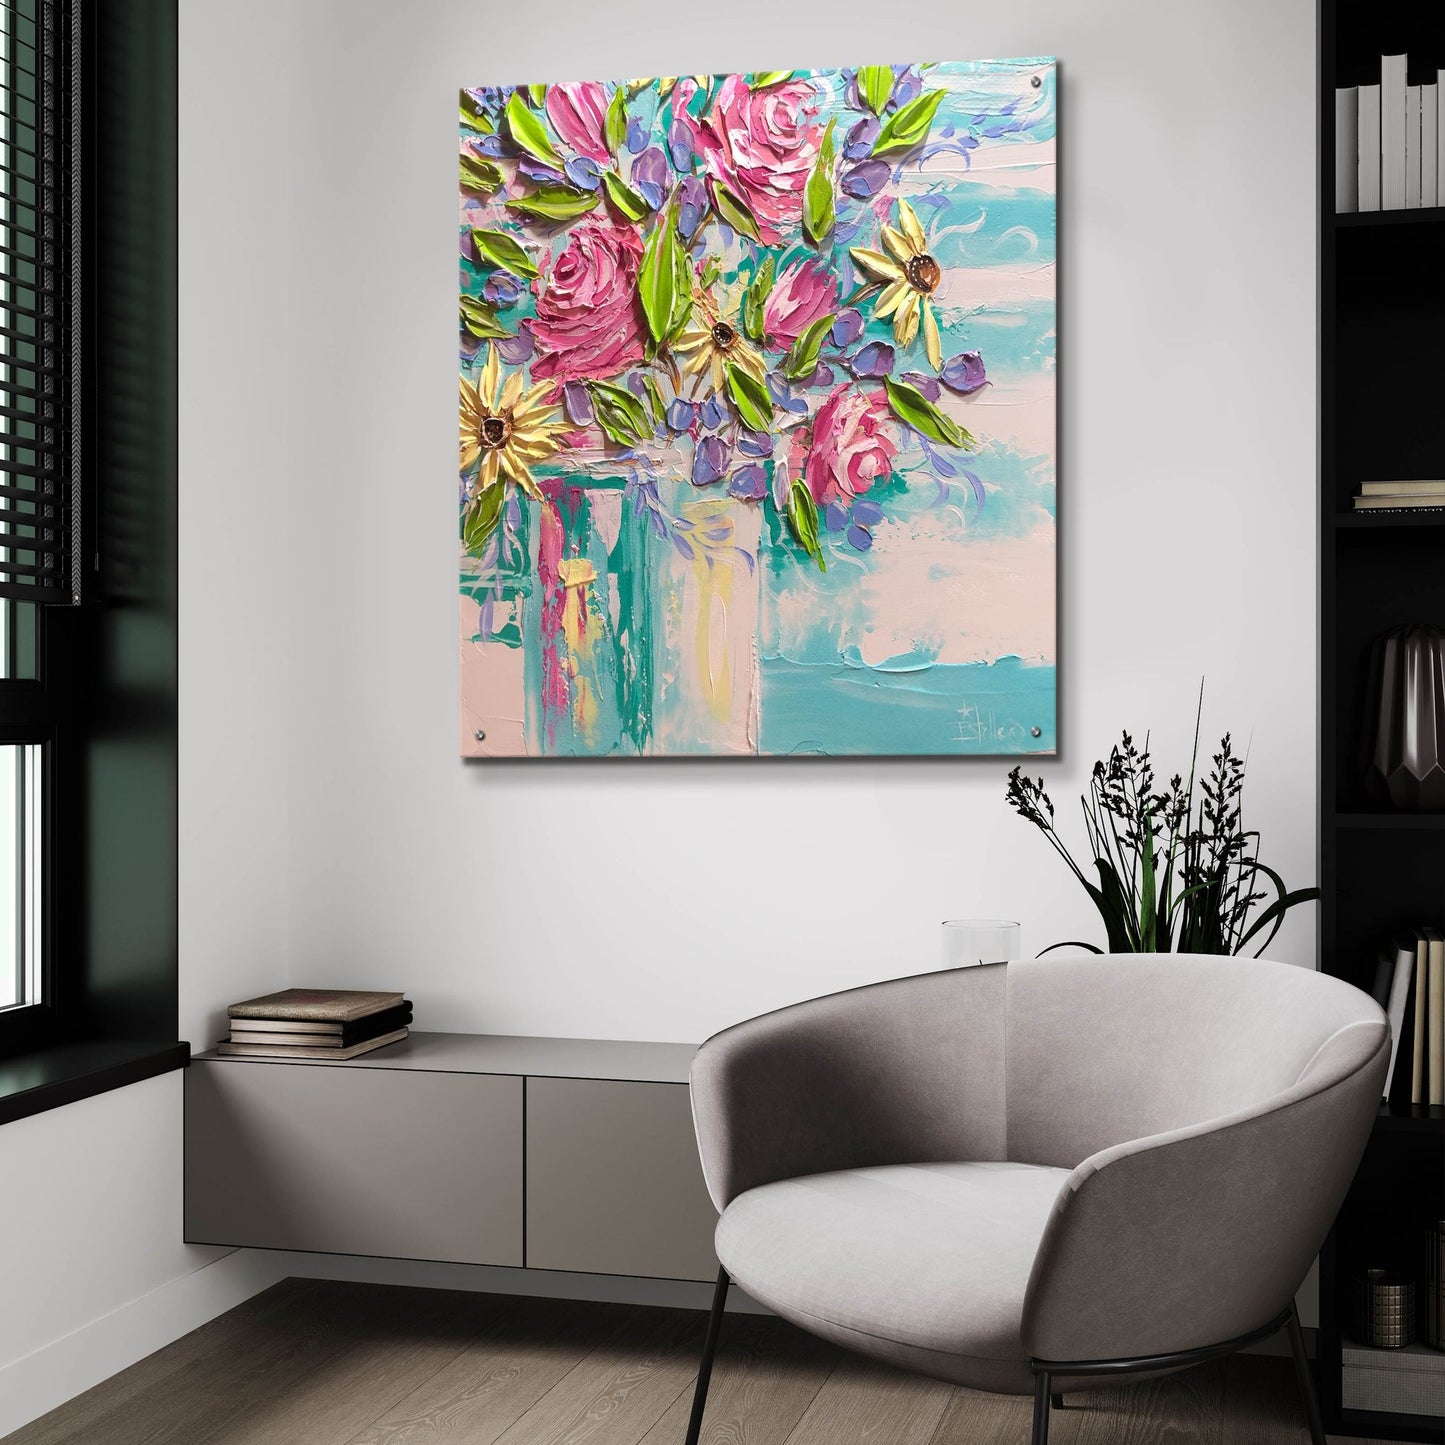 Epic Art 'Floral Bliss' by Estelle Grengs, Acrylic Glass Wall Art,36x36